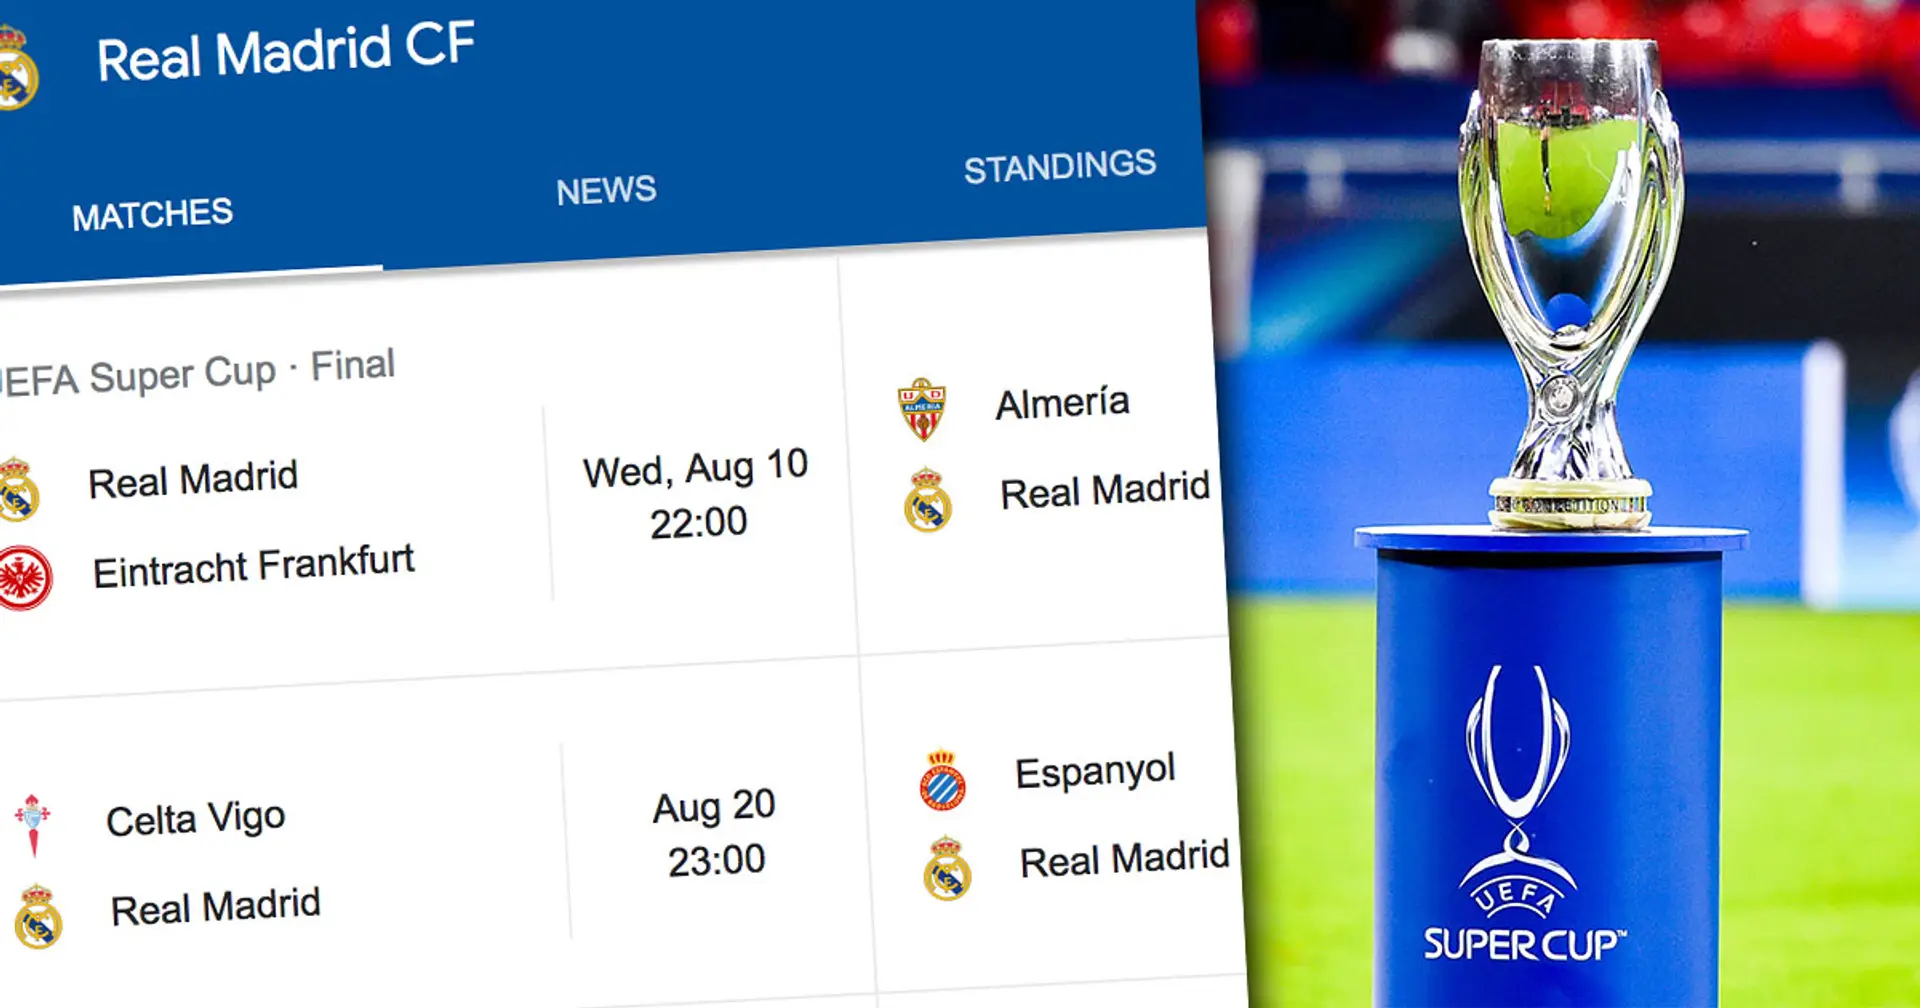 UEFA Super Cup coming up: Real Madrid's next 5 fixtures